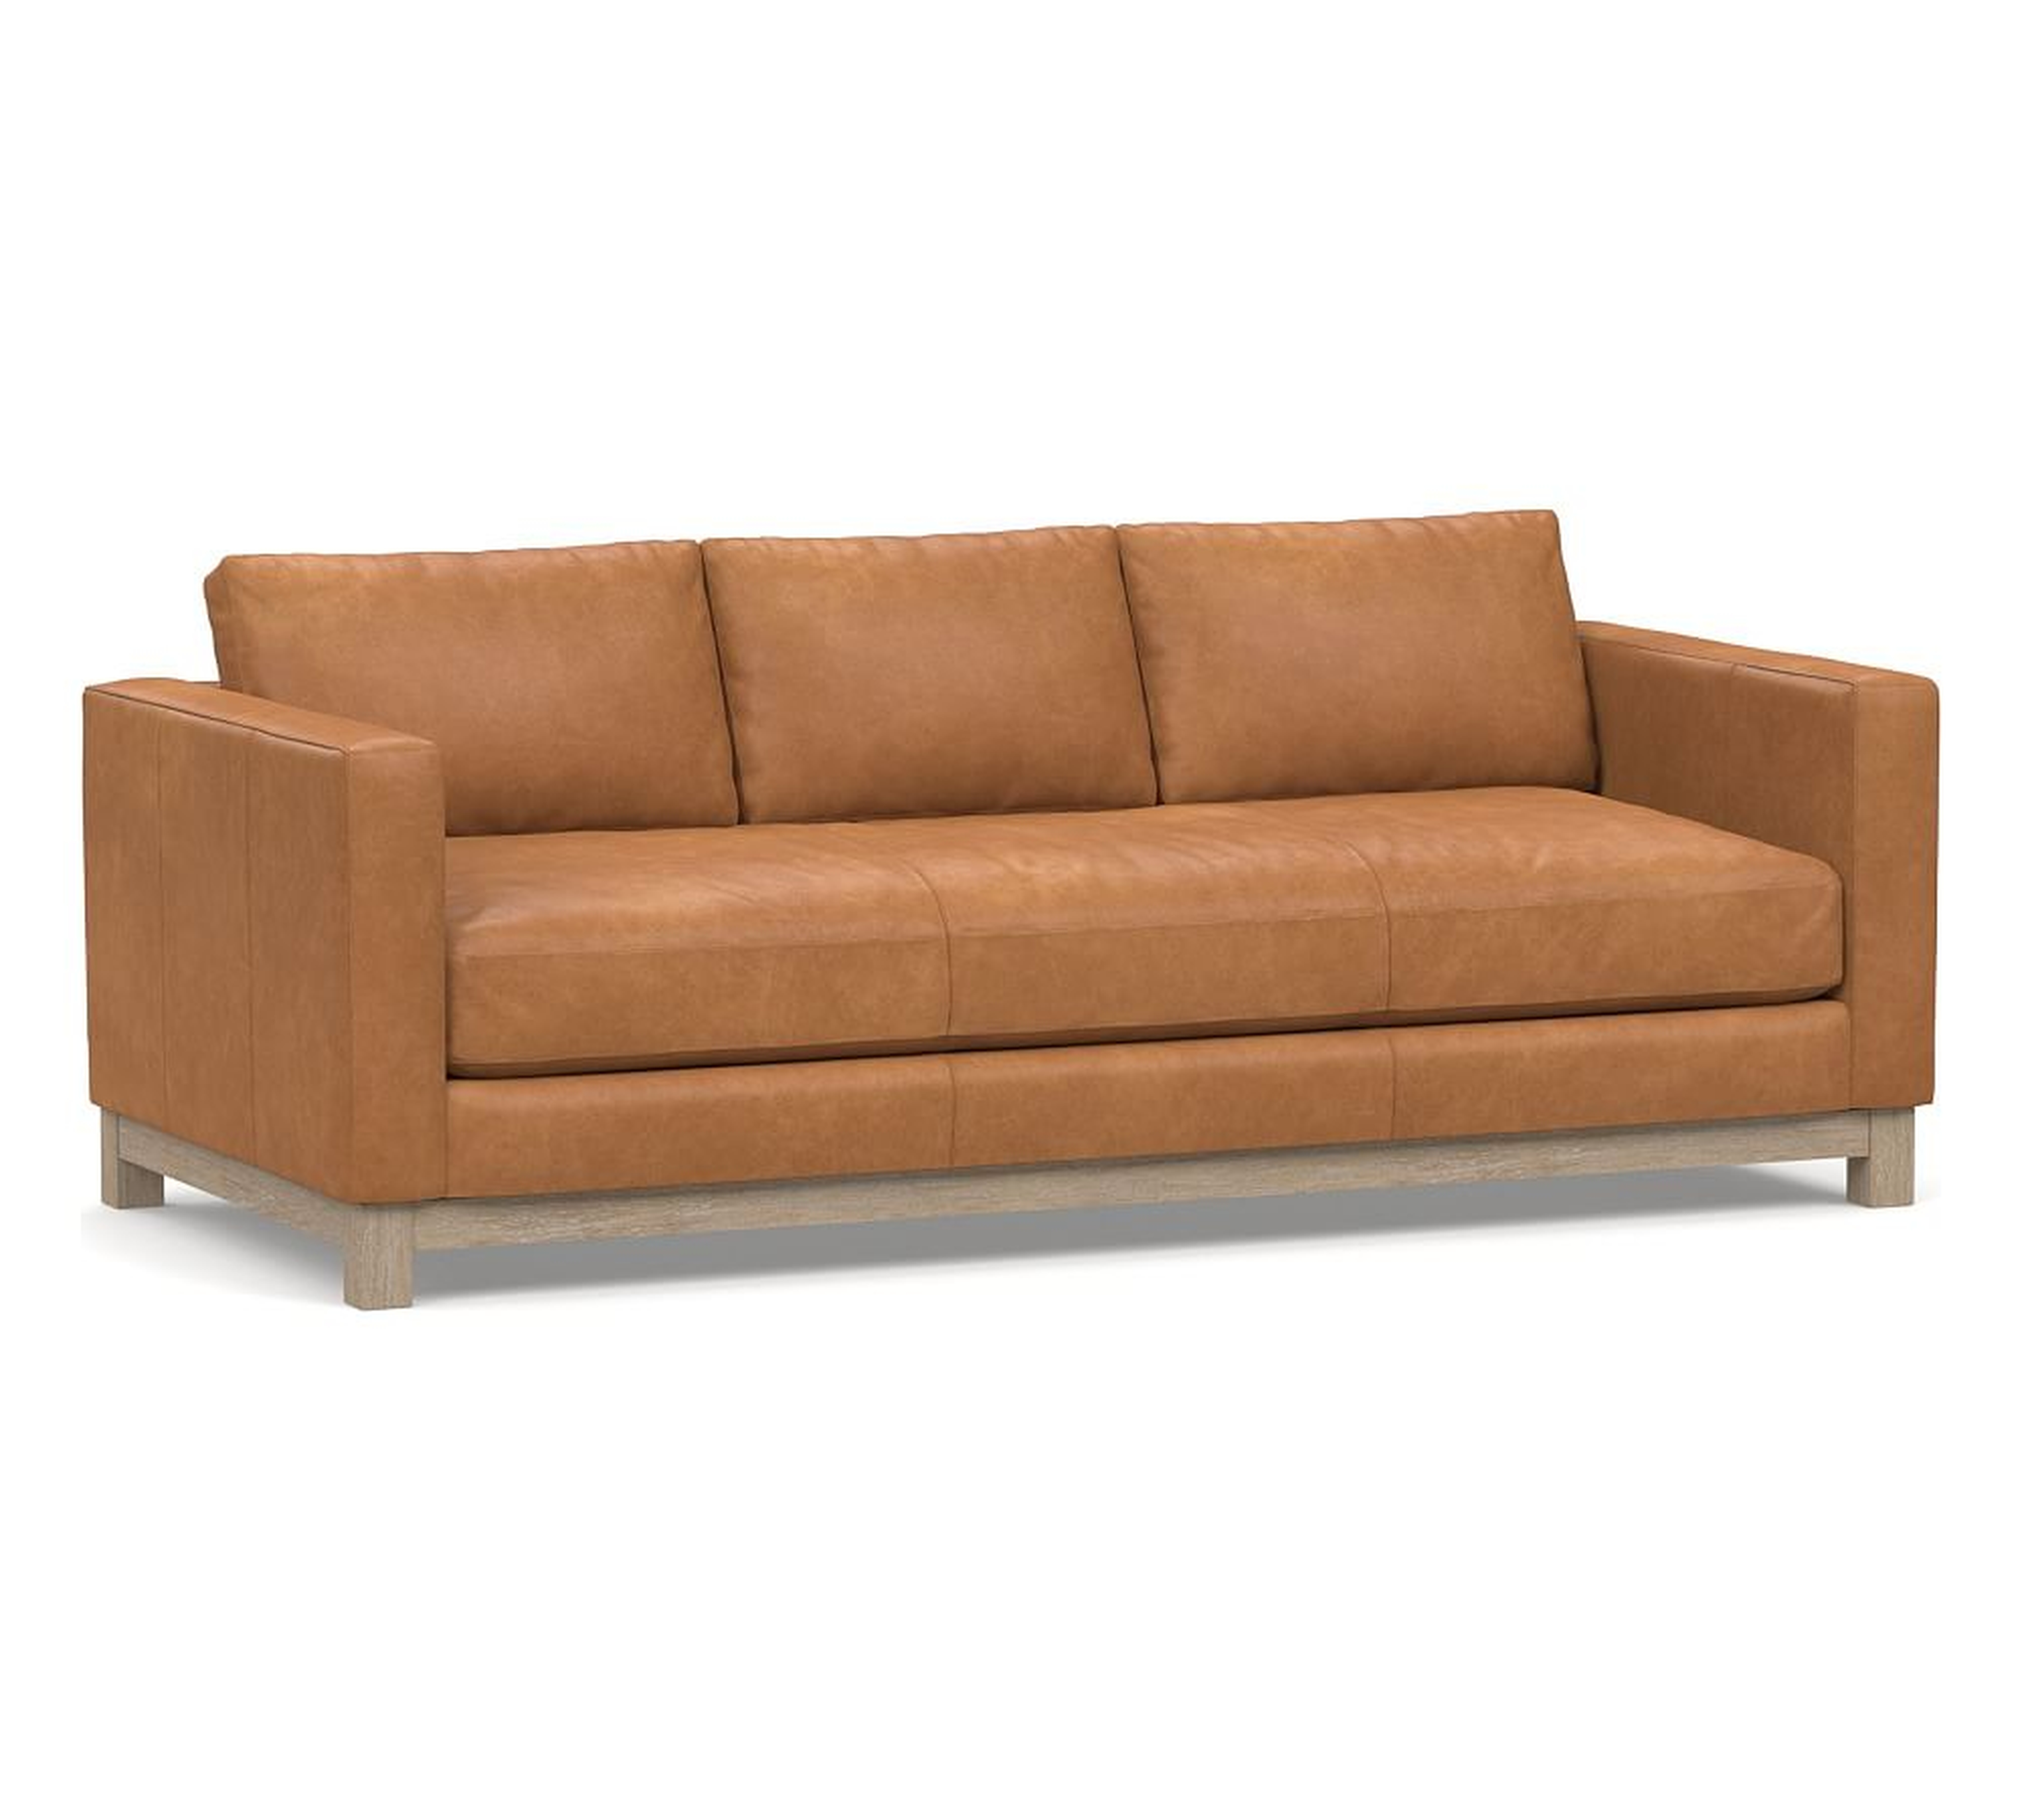 Jake Leather Sofa 85" with Wood Legs, Down Blend Wrapped Cushions Churchfield Camel - Pottery Barn